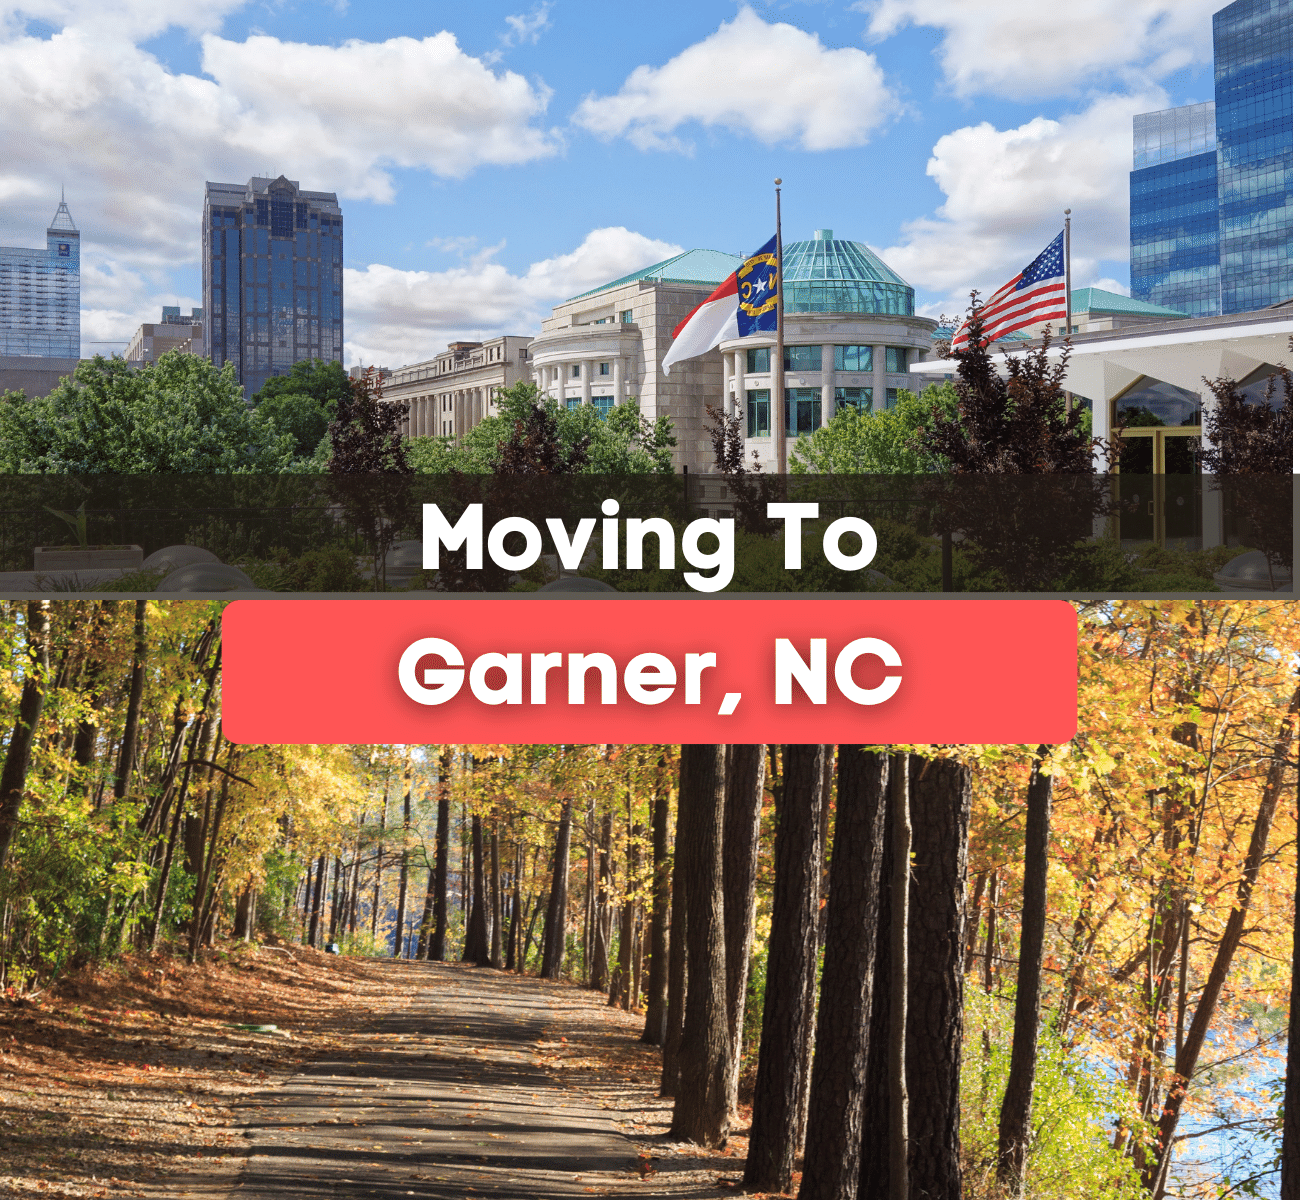 7 Things to Know BEFORE Moving to Garner, NC